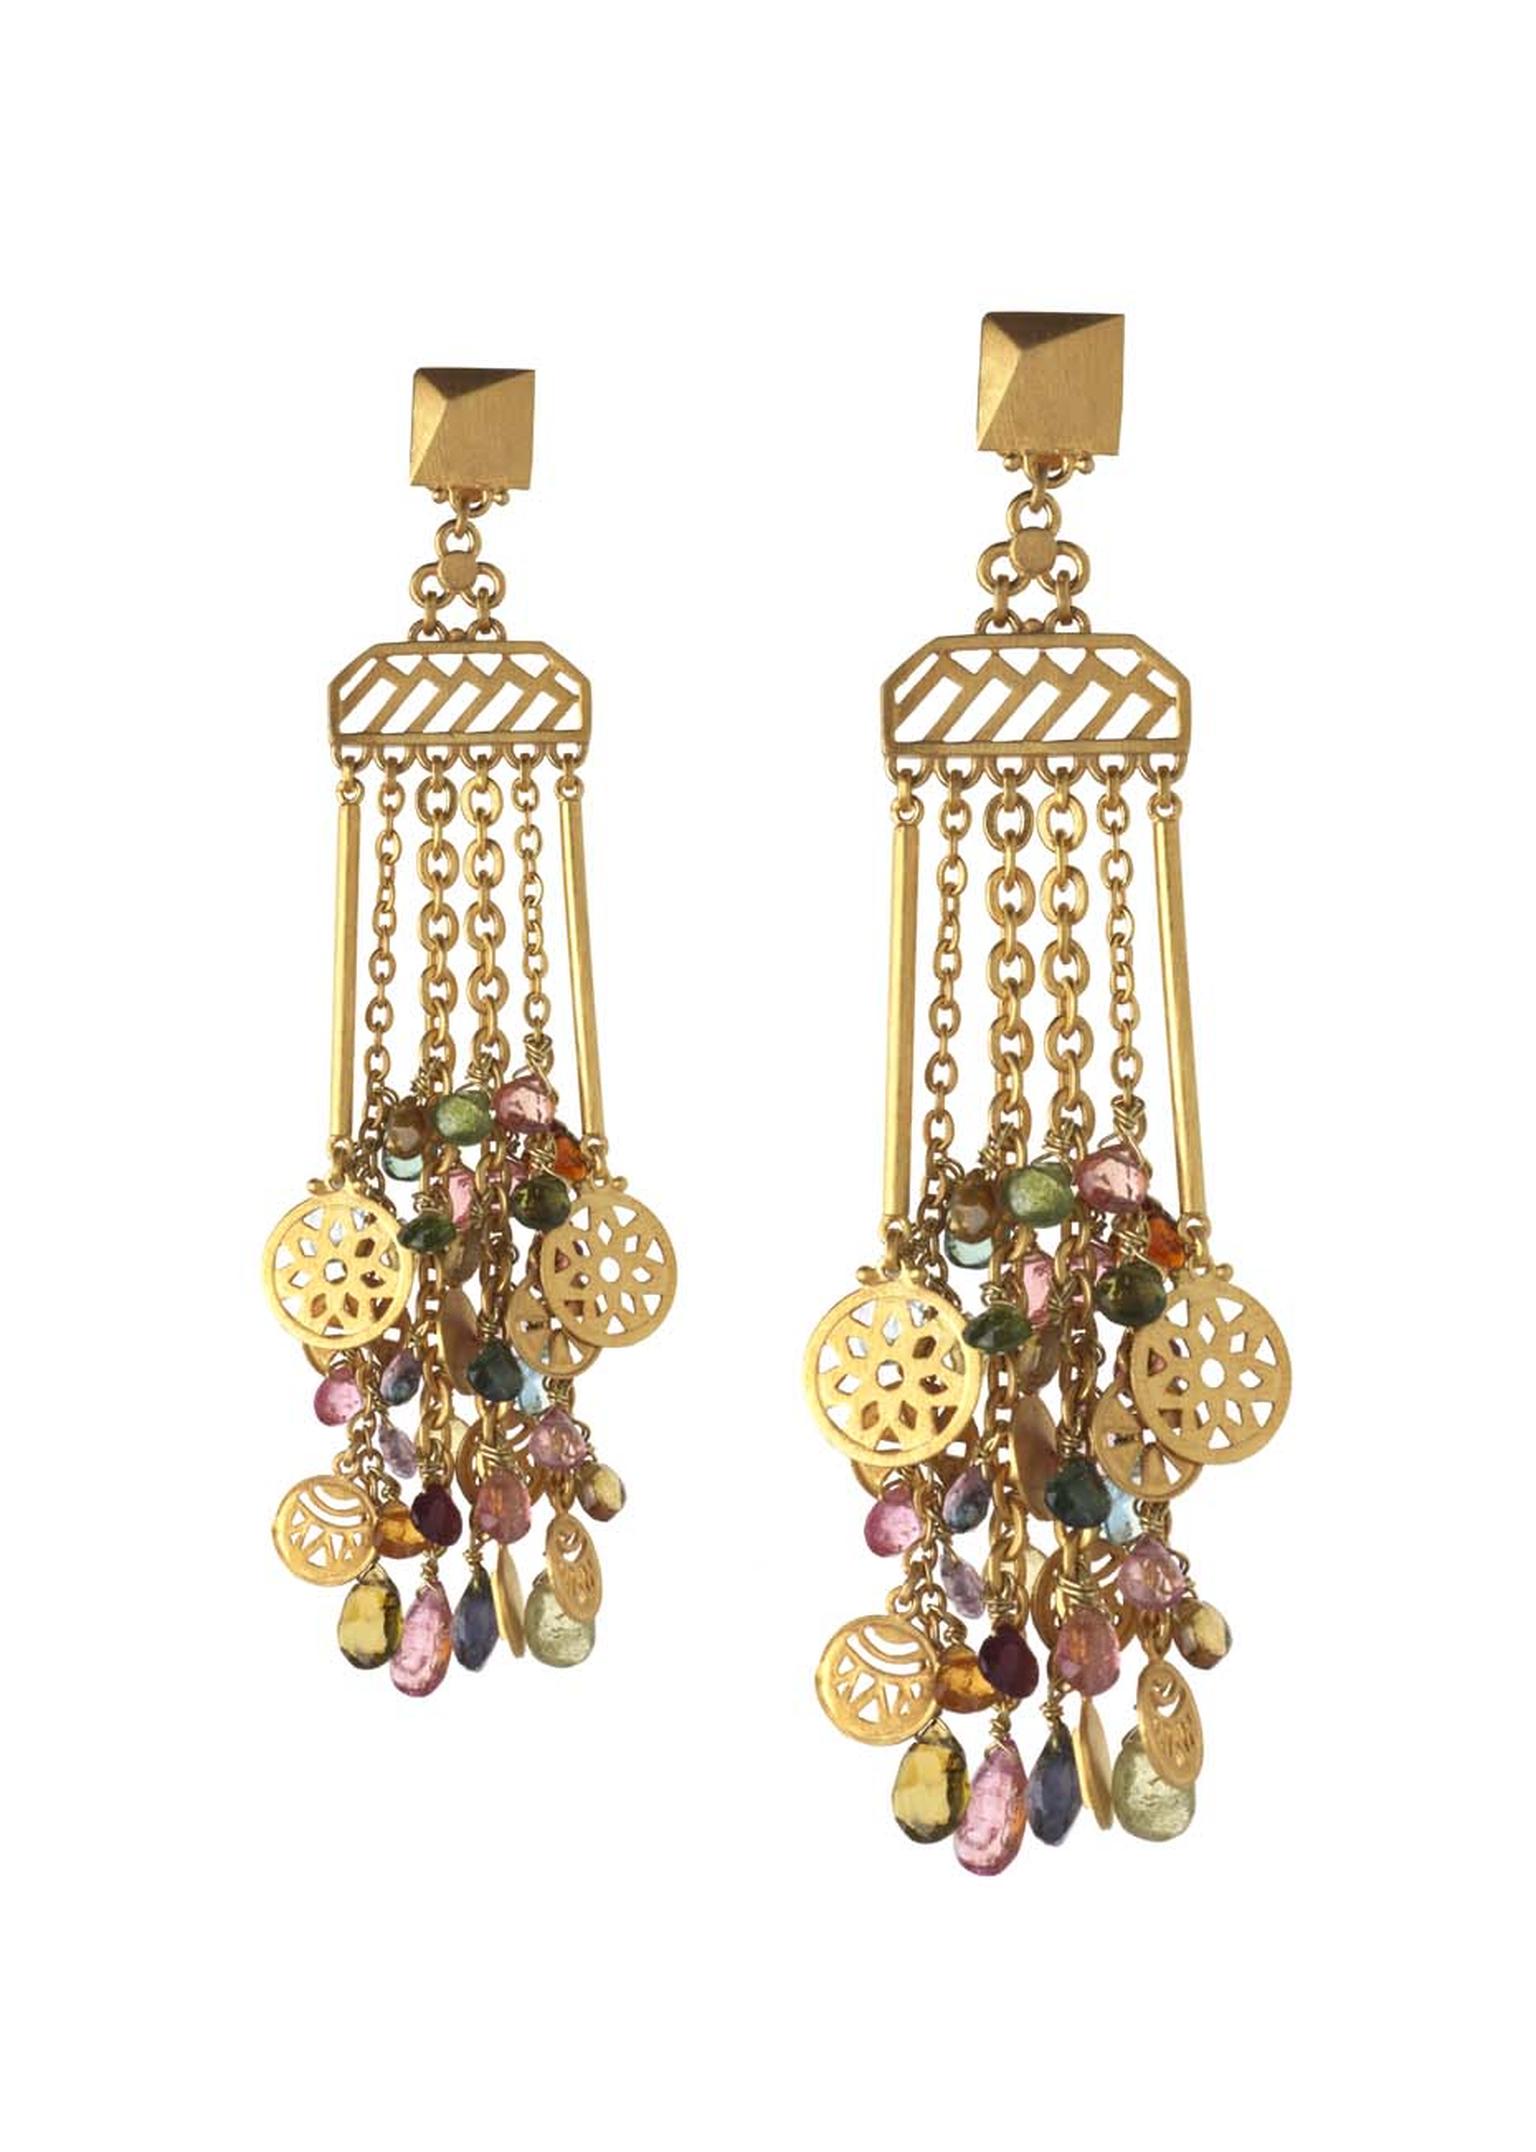 Azza Fahmy for Matthew Williamson Fringe Coin earrings from the Spring/Summer 2014 collection